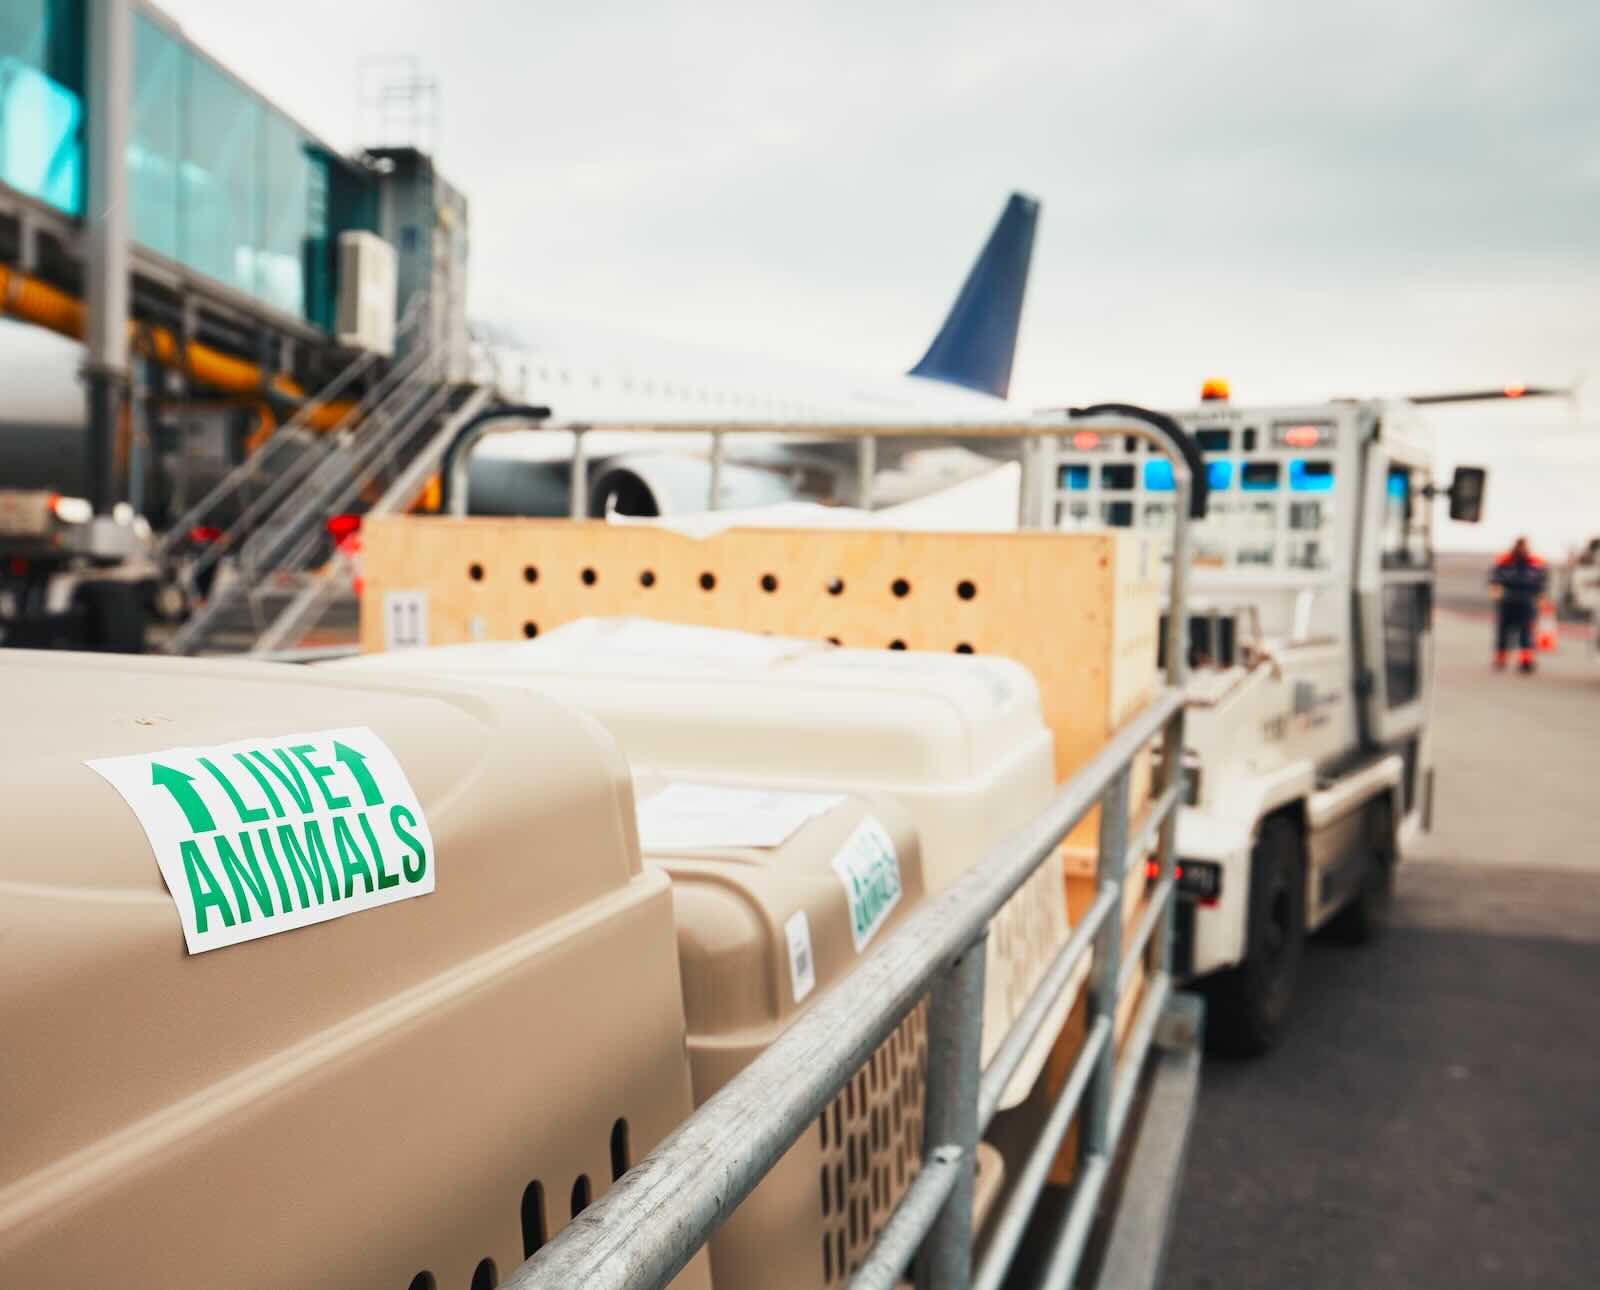 Live animal crates are stacked on a cart to be loaded onto an airplane